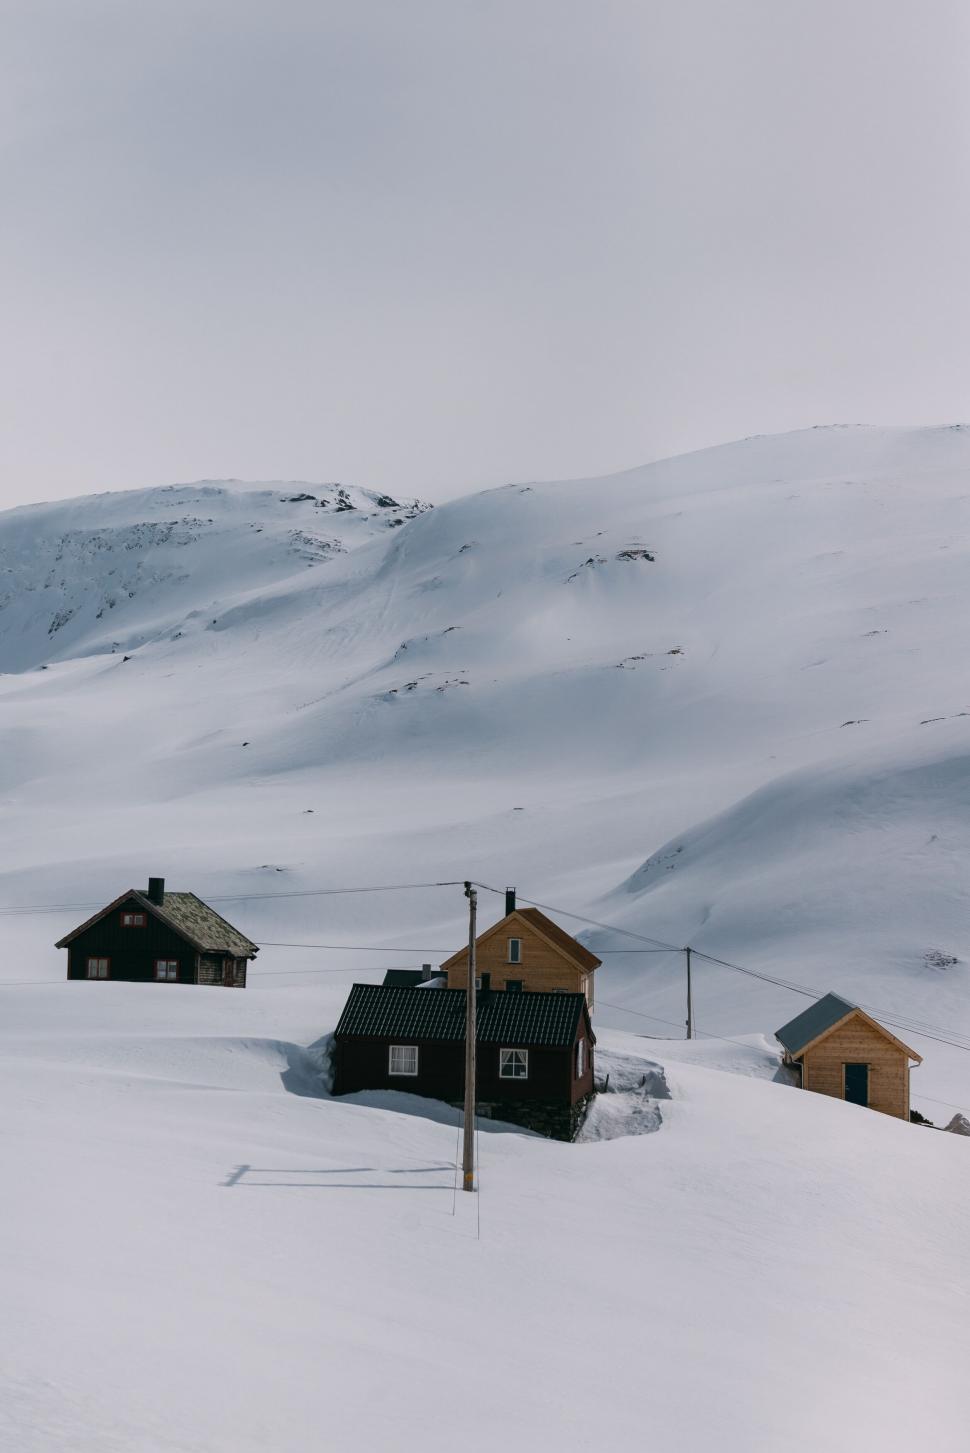 Free Image of Snowy mountain landscape with houses 